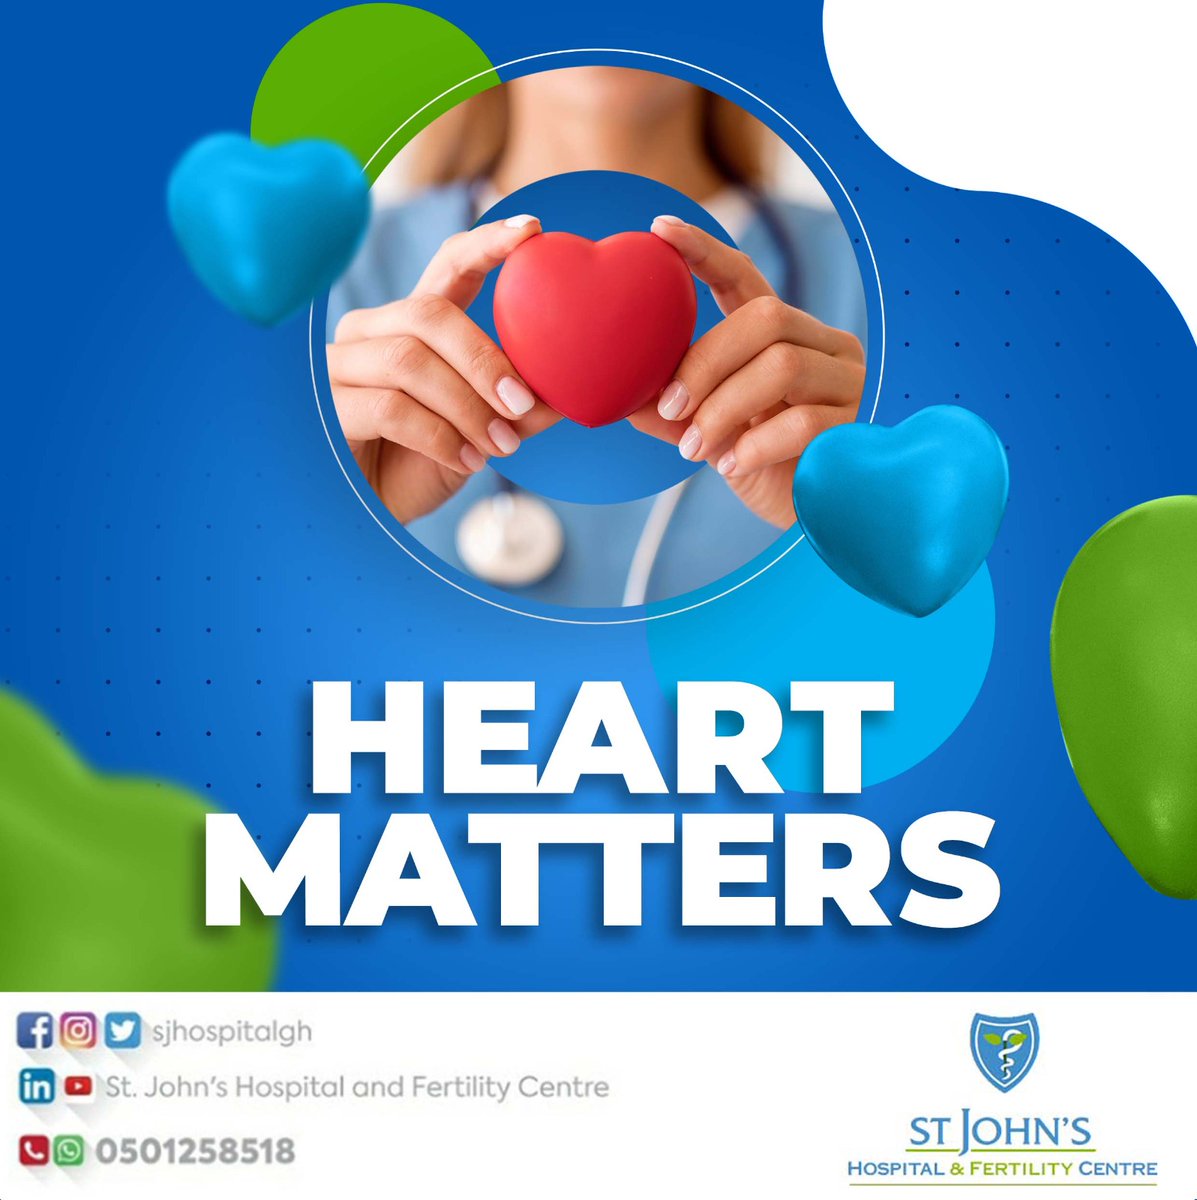 Catch our #MattersOfTheHeart series on all our social media platforms. 

Stay connected!

#SkillToHealHeartToCare #SJHFC #Heart #Accra #Ghana